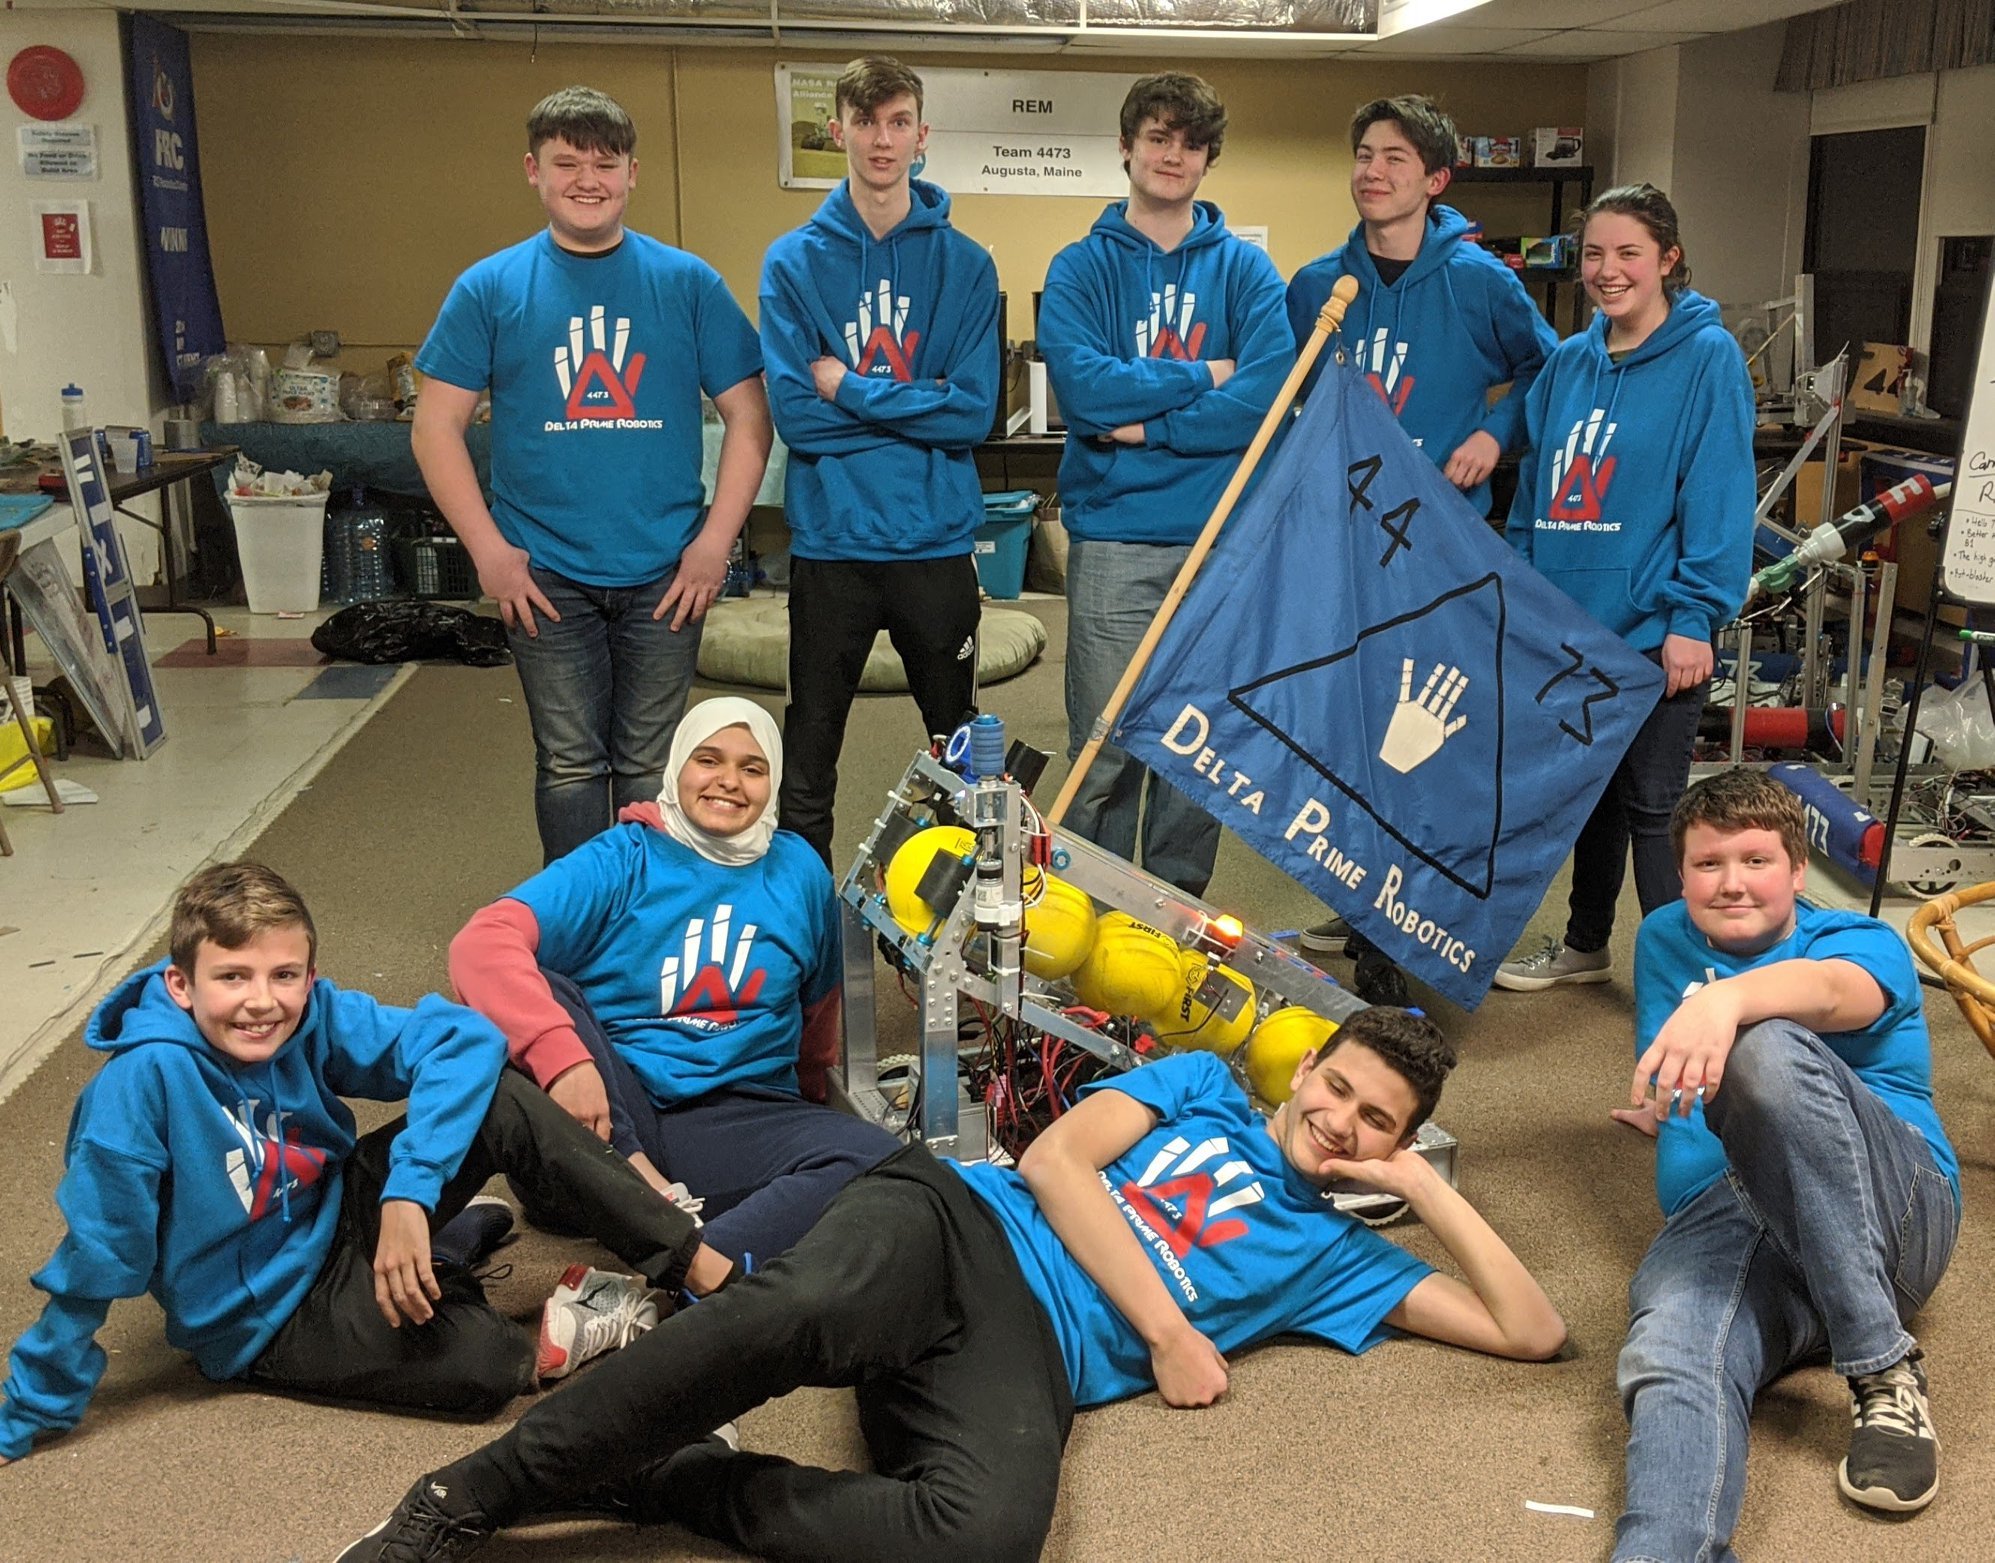 Sana with her robotics team before social distancing restrictions.